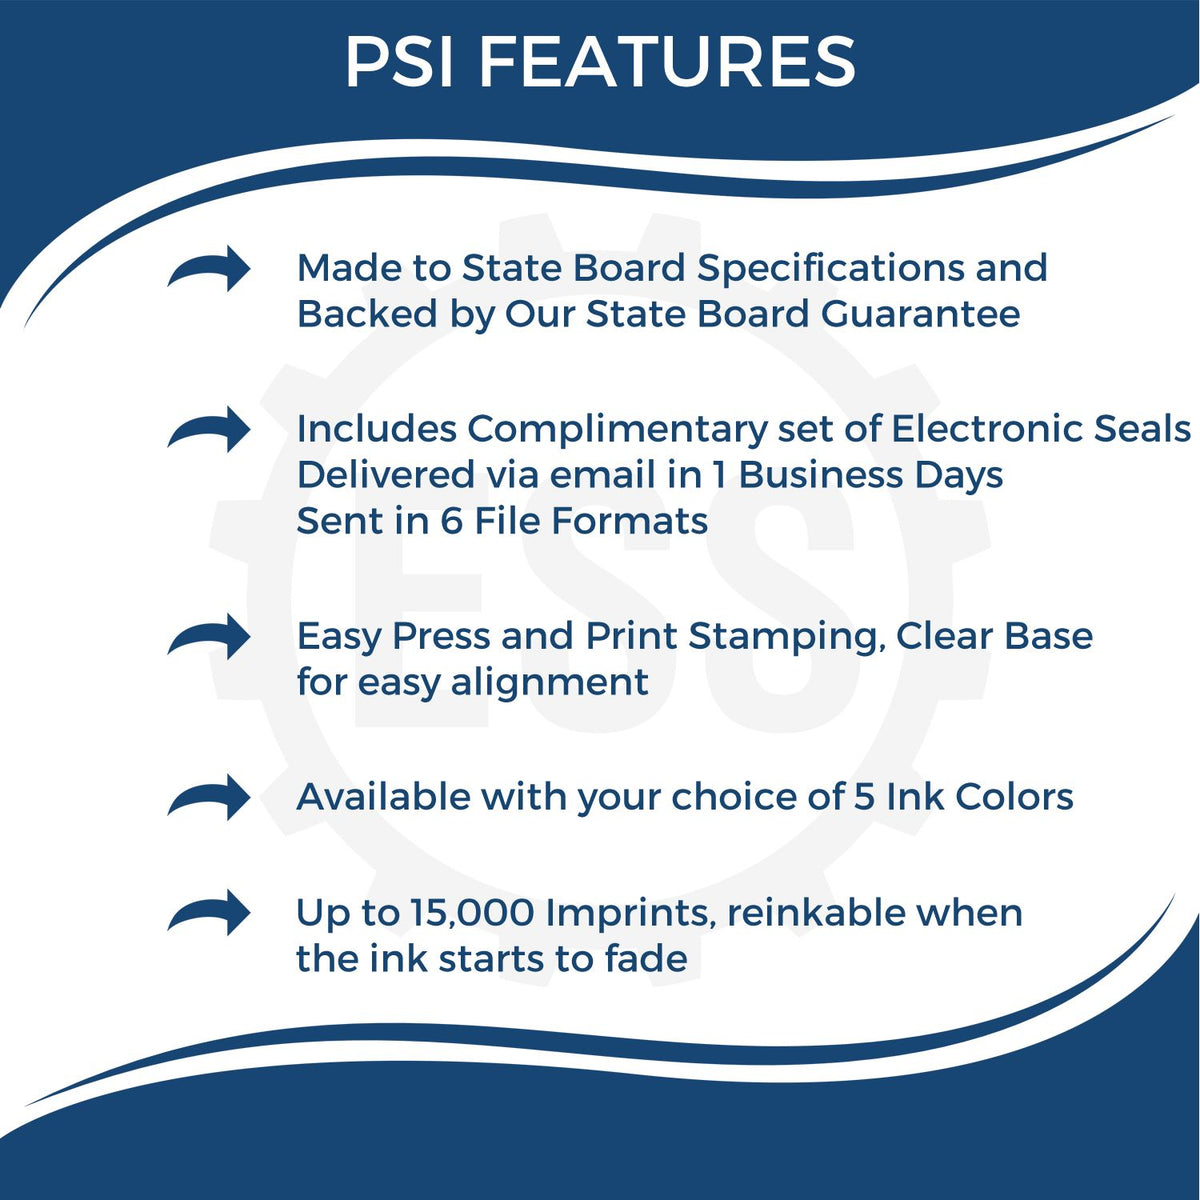 A picture of an infographic highlighting the selling points for the PSI Utah Notary Stamp